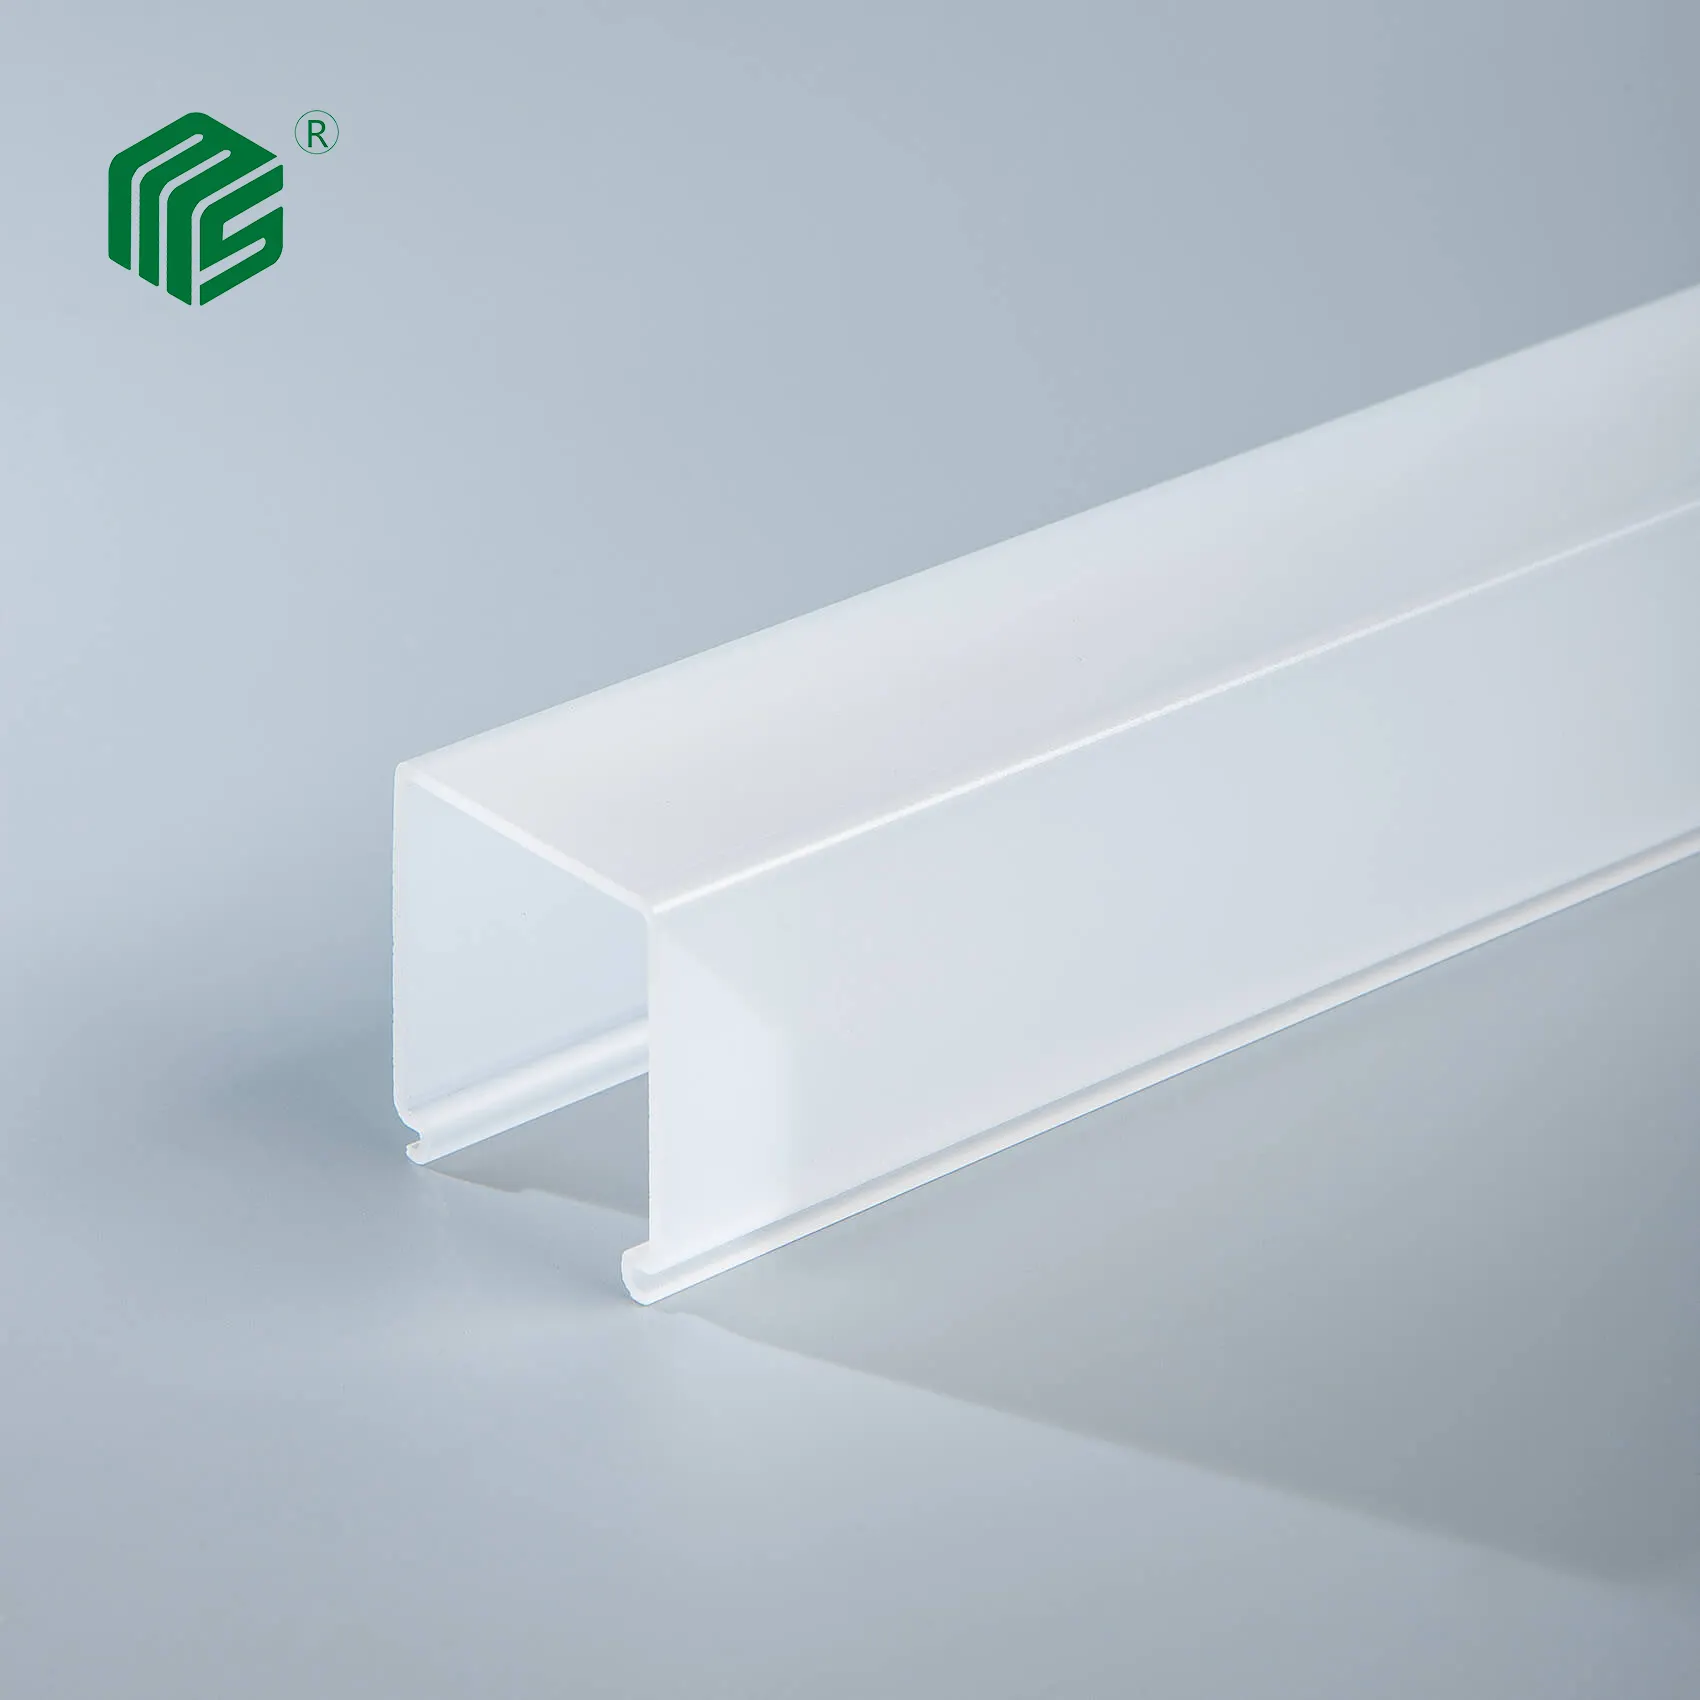 Extruded opal white diffused frosted pc profiles for linear LED lighting used